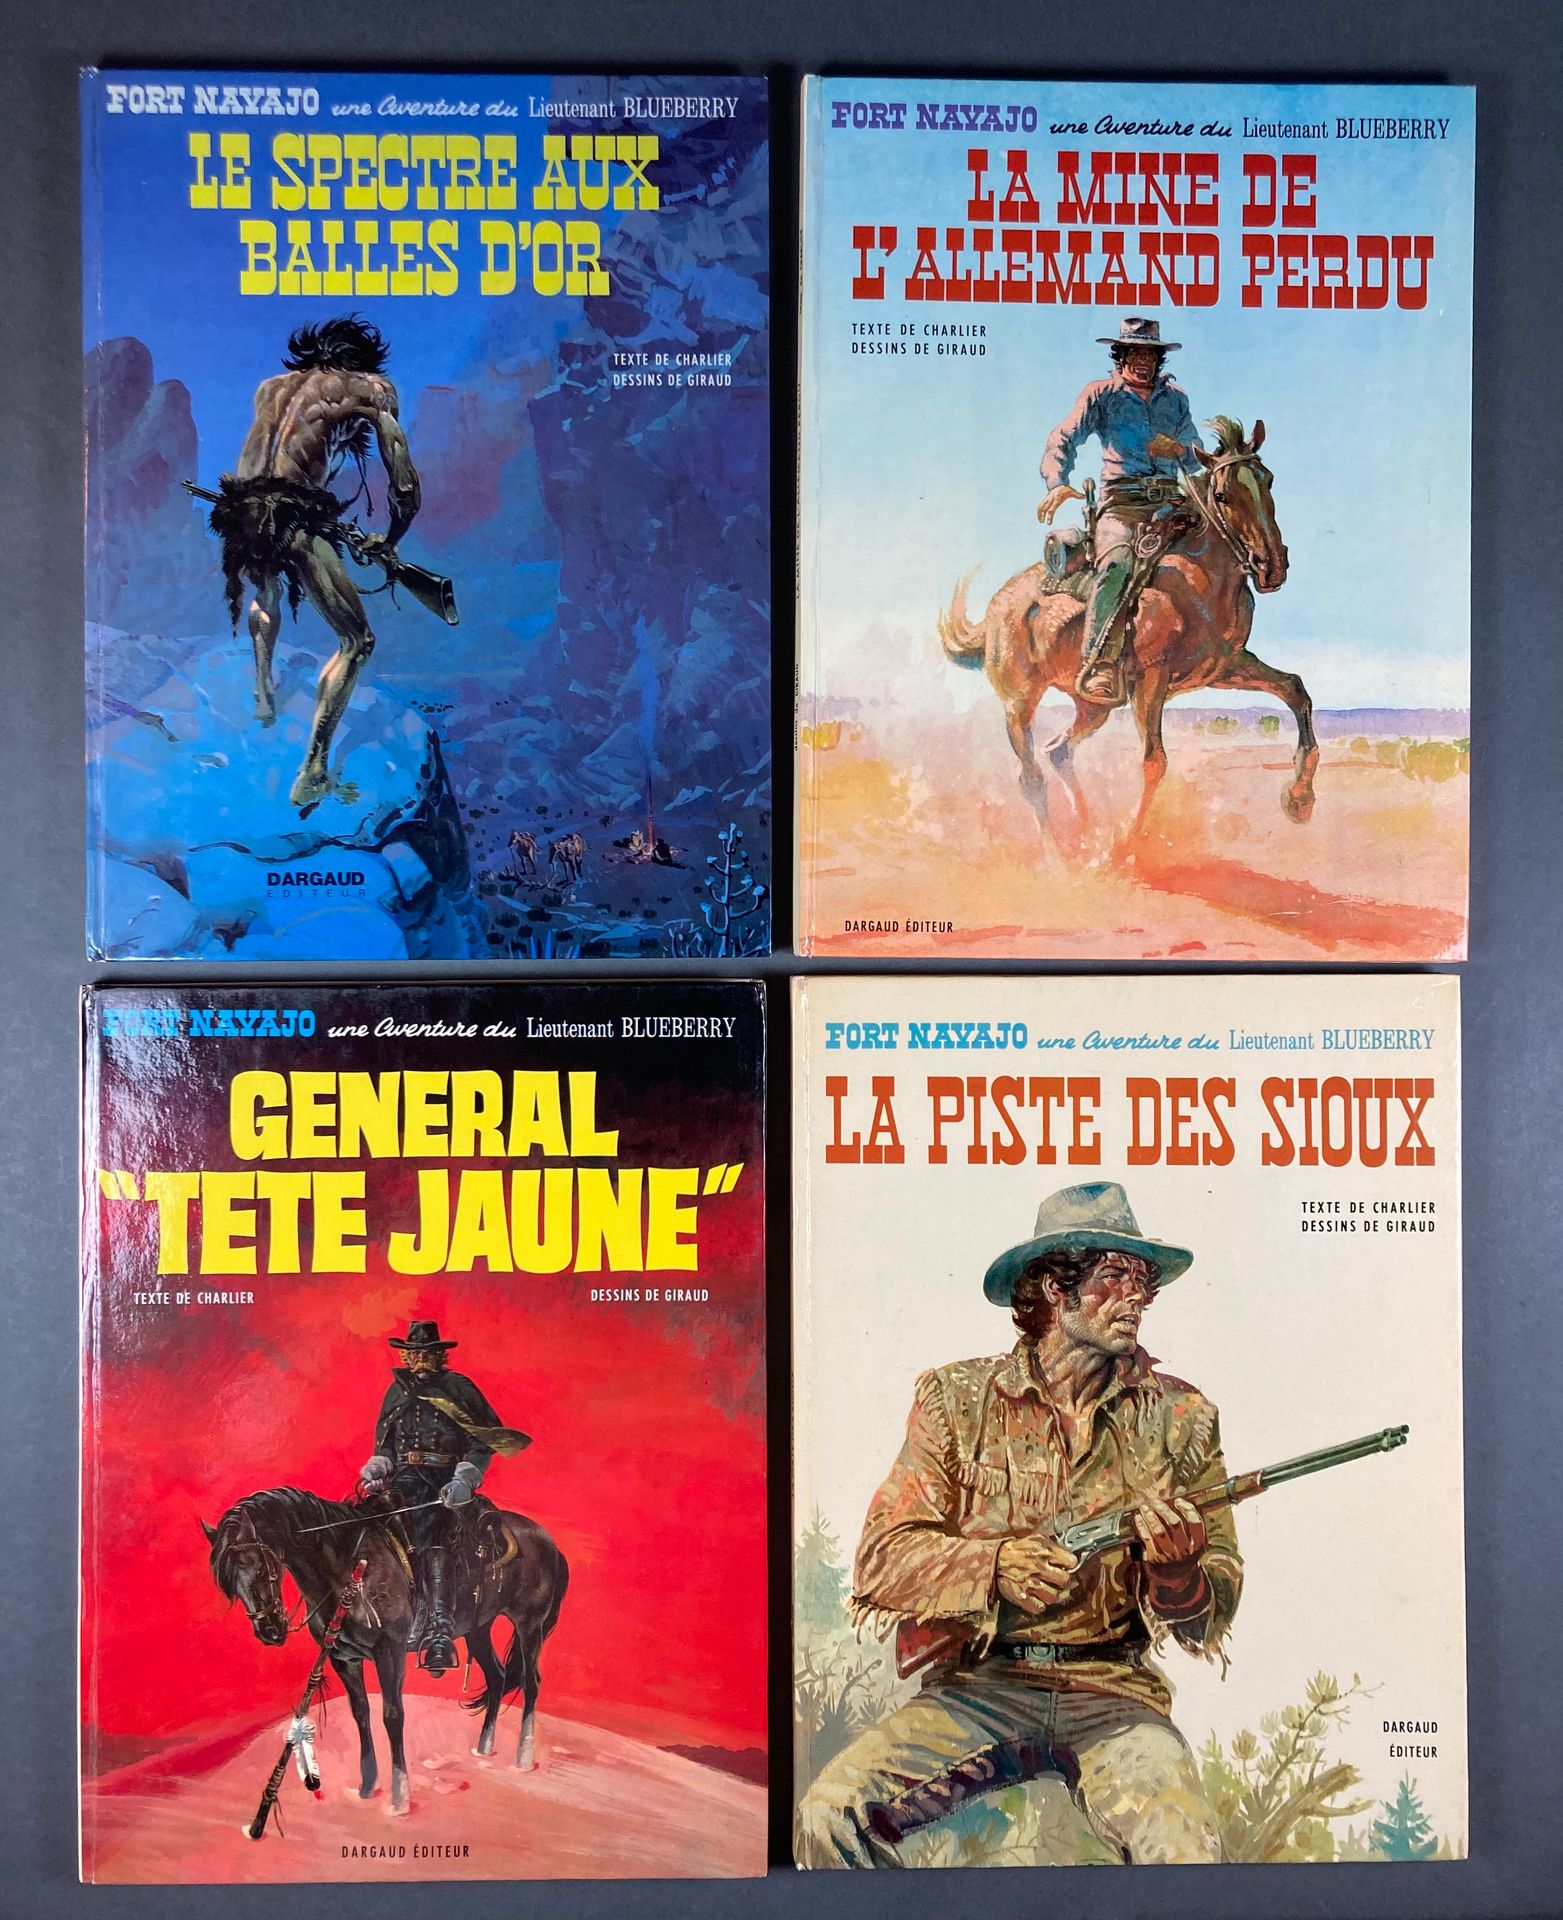 Giraud - Blueberry La piste des sioux, 9, 1971, EO, TBE except for the spine whi&hellip;